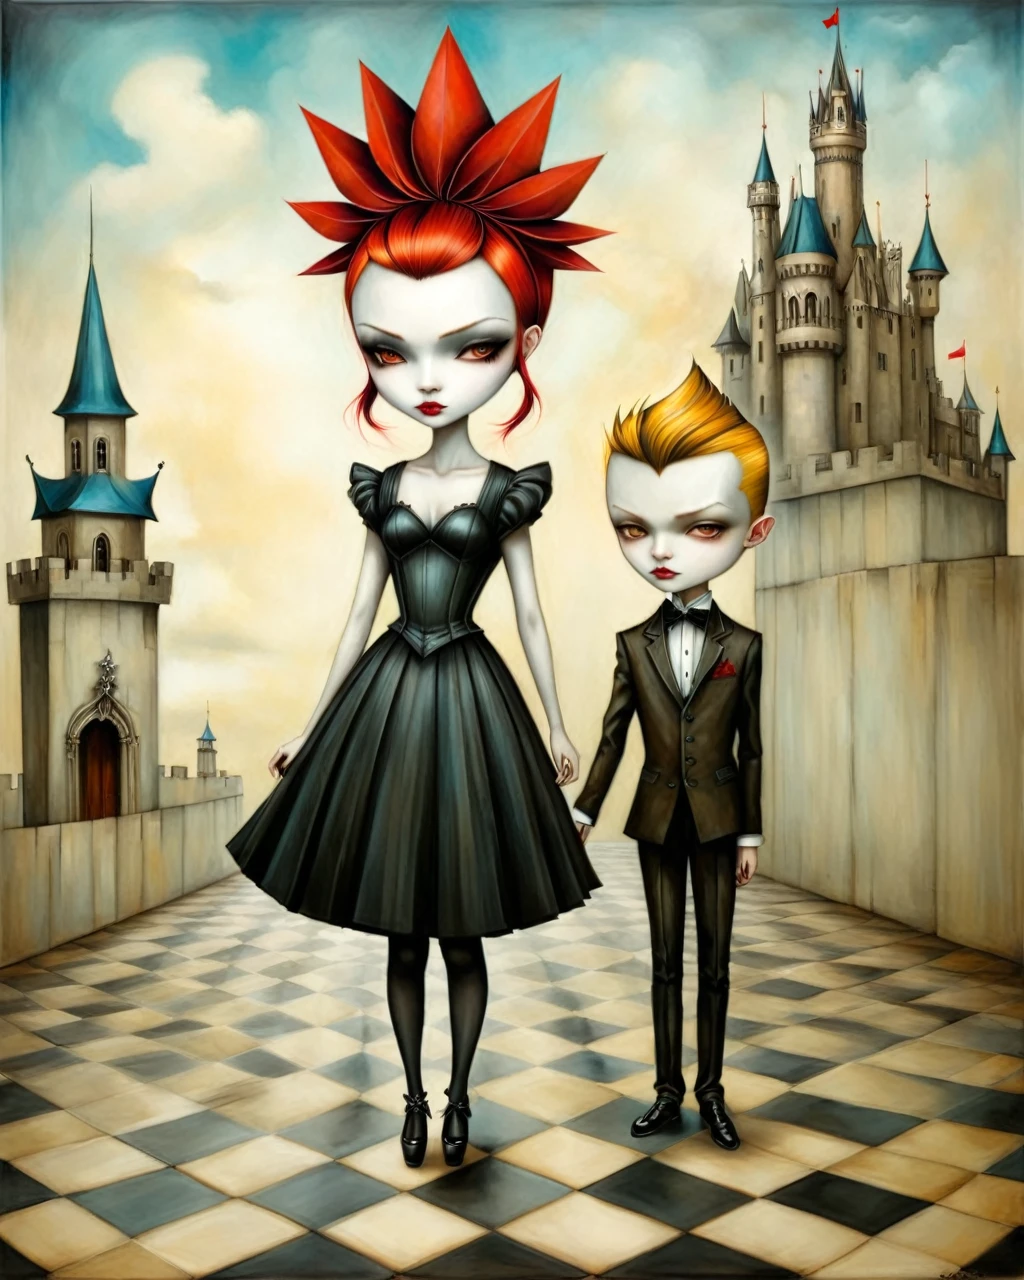 painting of a girl and boy gothic labyrinth sarah jareth david bowie masquerade ball castle mansion checkered floor origami style in the style of 試試安德魯斯,試試安德魯斯 style,試試安德魯斯 art,試試安德魯斯a  試試安德魯斯, 安德鲁斯·埃索艺术风格, inspired 通過以掃·安德魯斯, 試試安德魯斯 ornate, 通過以掃·安德魯斯, 試試安德魯斯, inspired 由欧洲航天局, 由欧洲航天局,  厄利, 試試安德魯斯, 本傑明·拉科姆, 1個女孩, 1男孩, in the style of 試試安德魯斯, 試試安德魯斯 . 纸艺术, 打褶纸, 折疊的, 摺紙藝術, 褶皺, 剪切和折叠, 